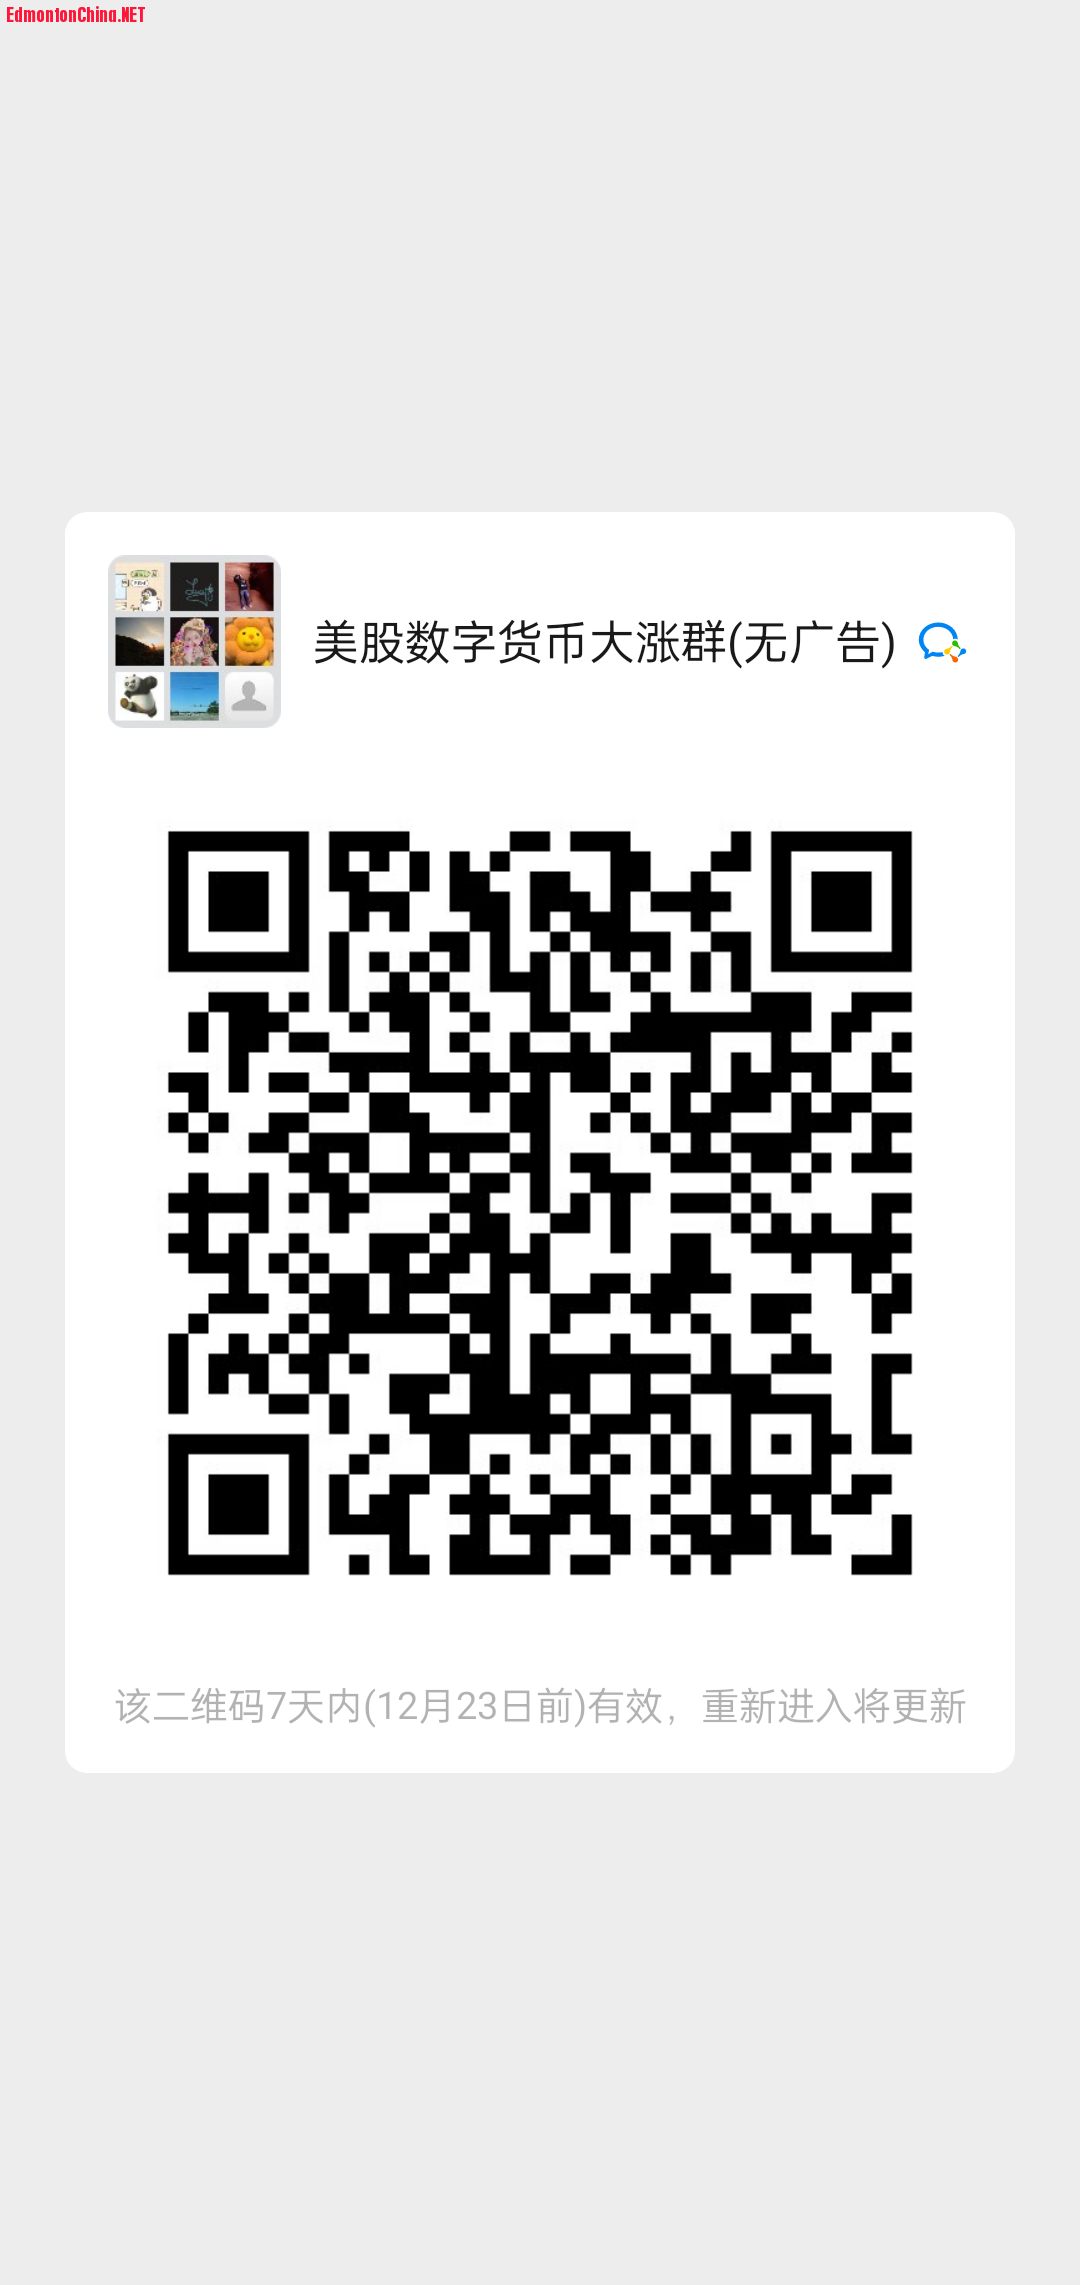 mmqrcode1639712856426.png